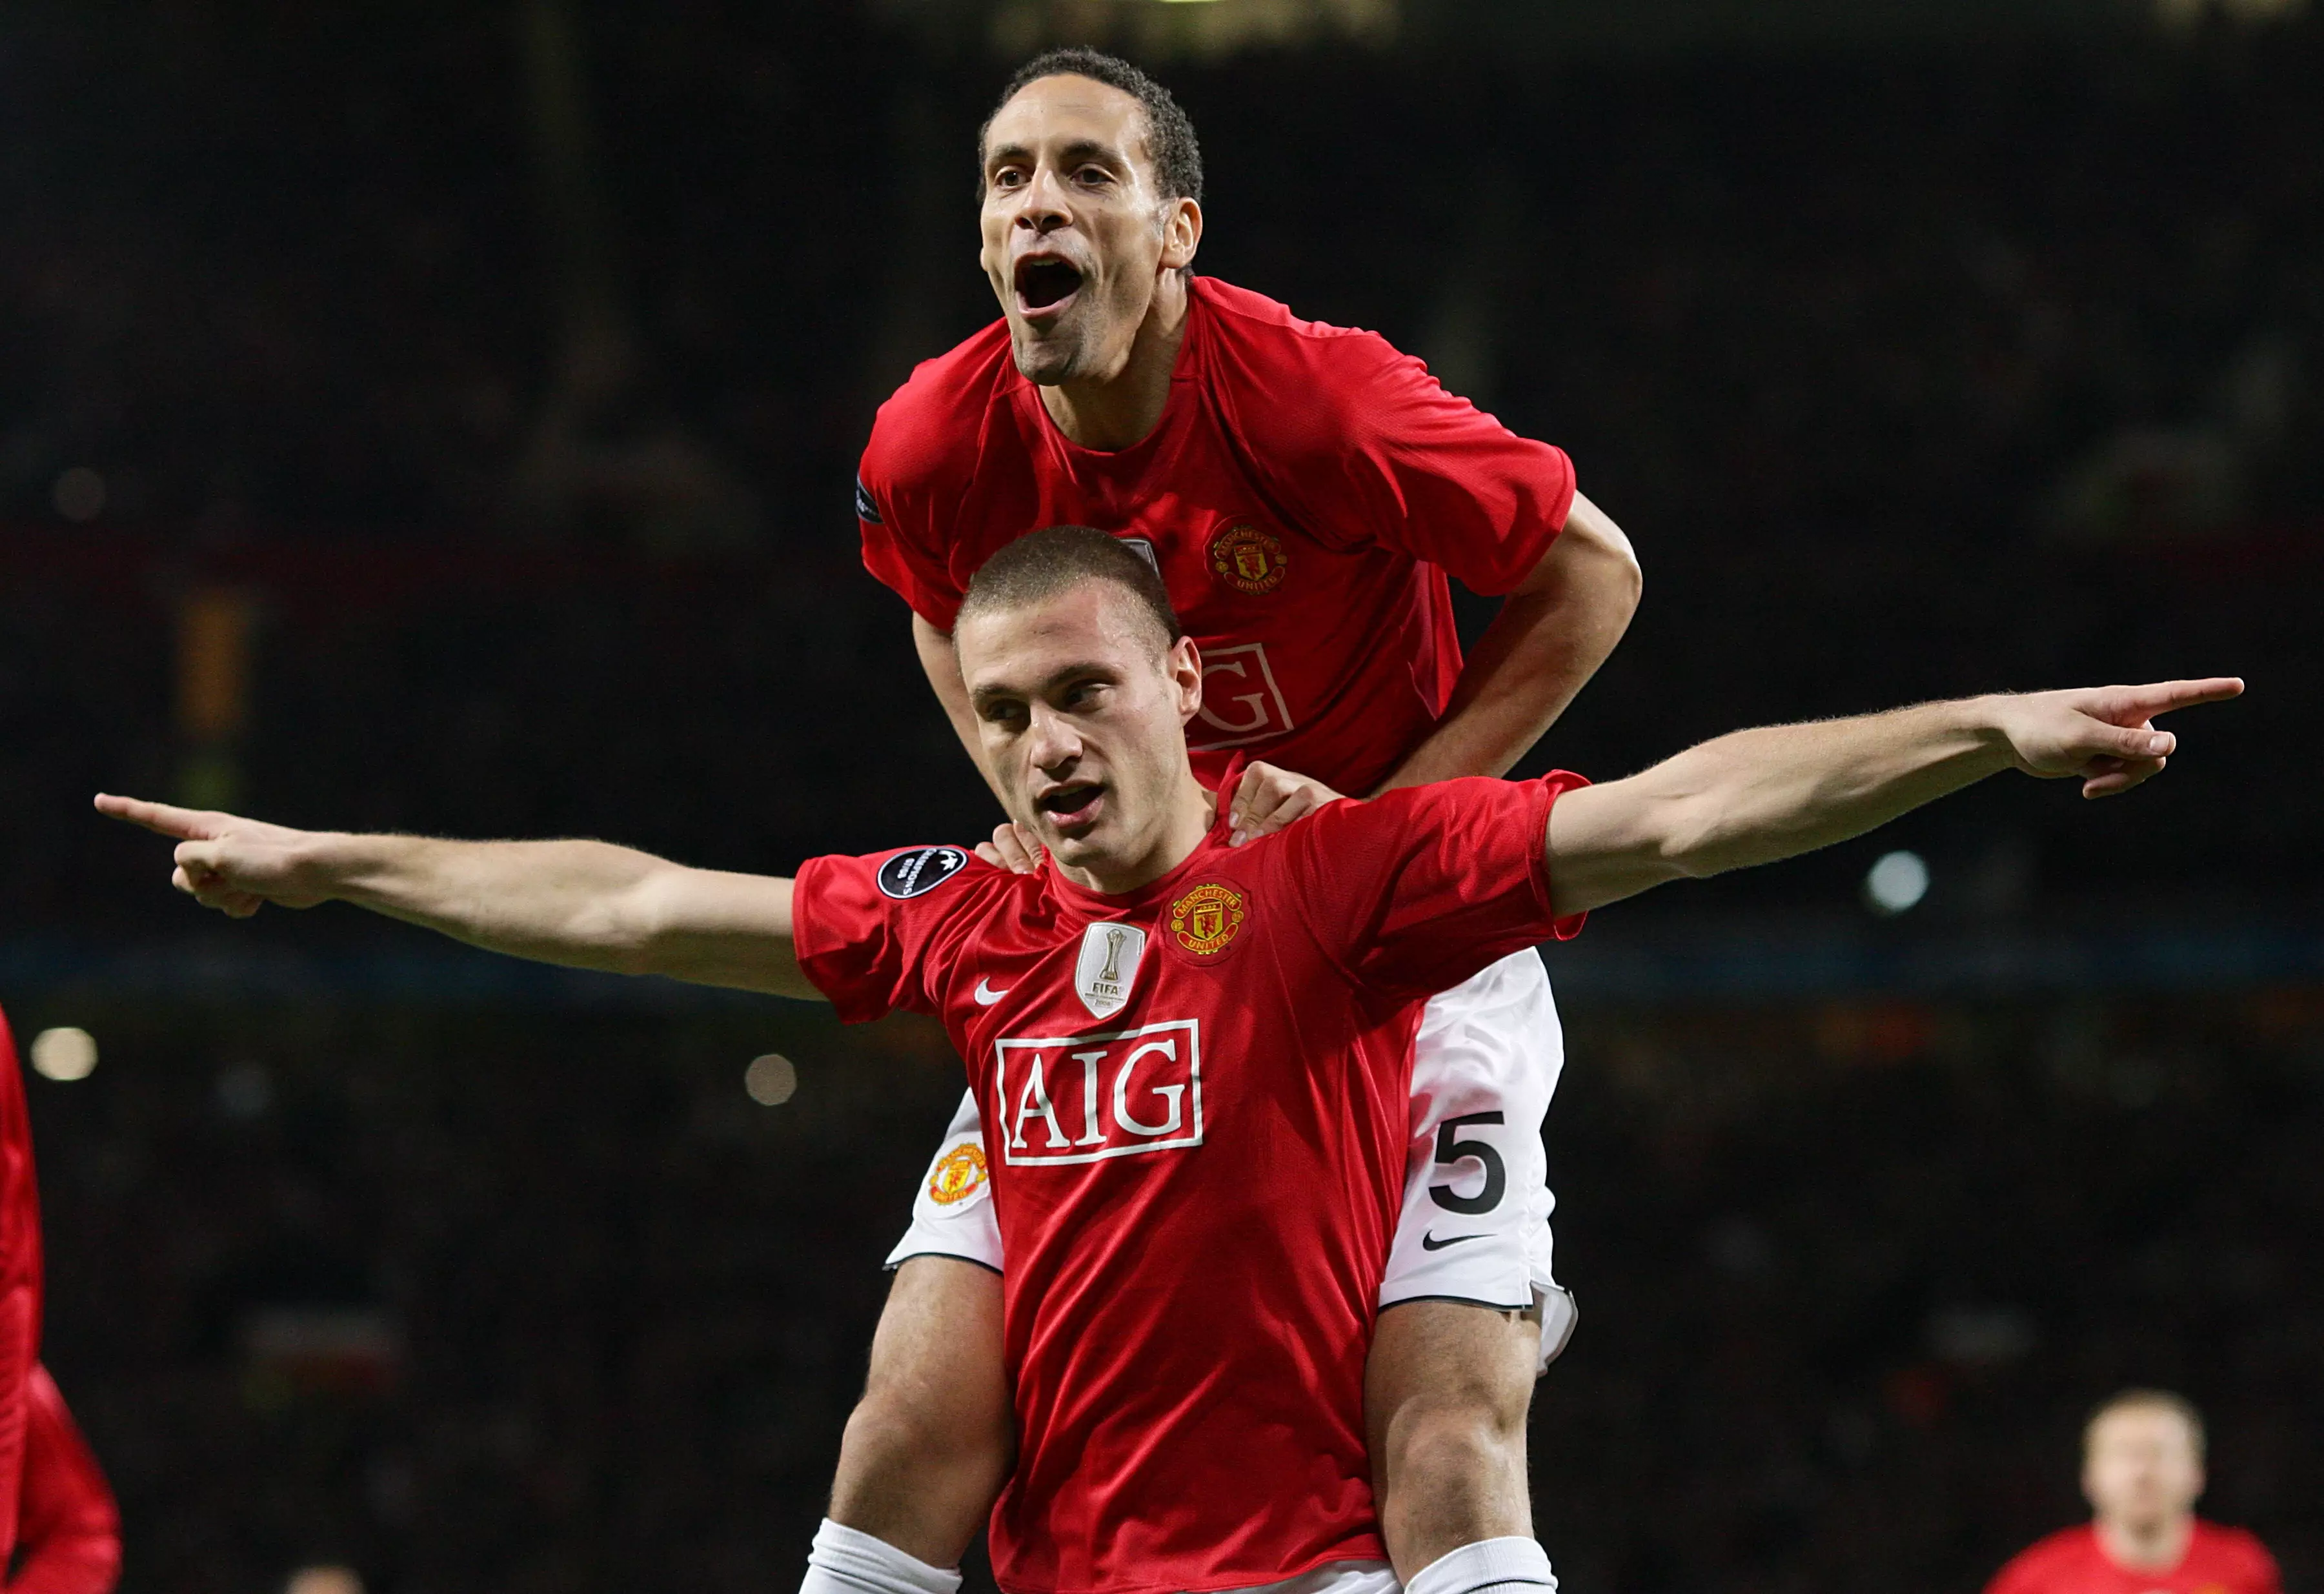 Ferdinand and Vidic are one of the best defensive partnerships in Premier League history. Image: PA Images